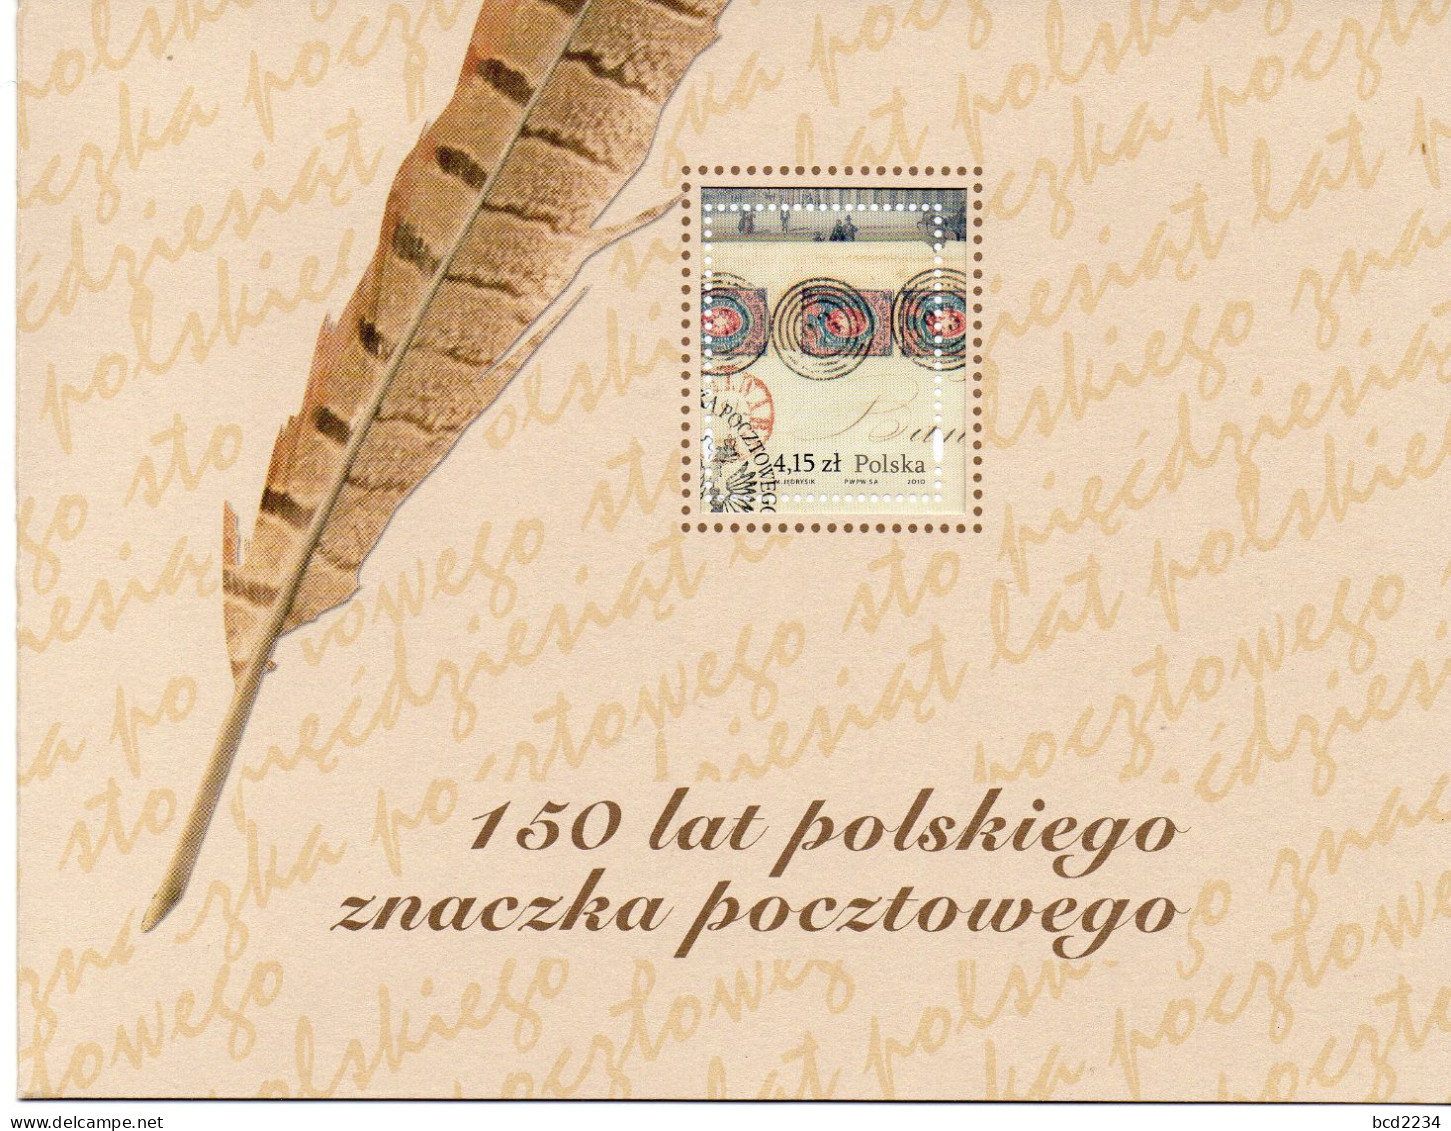 POLAND 2010 POLISH POST OFFICE LIMITED EDITION FOLDER: 150 YEARS ANNIVERSARY 1860 FIRST POLISH STAMP FDC & MS & ENVELOPE - Blocs & Hojas